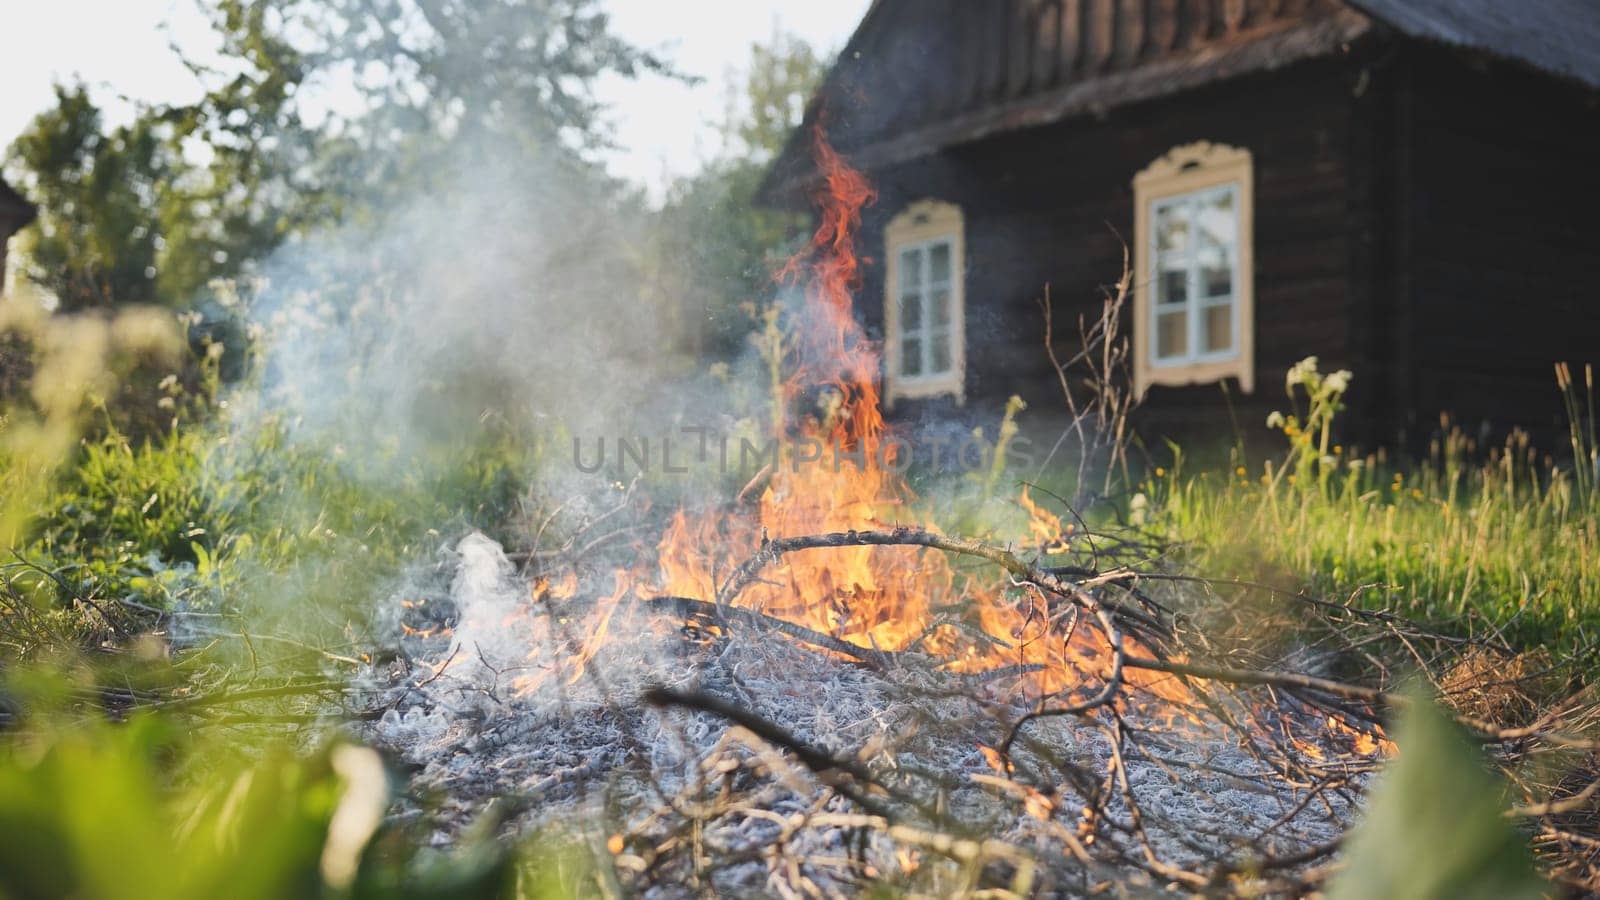 Burning branches outside the village house in eastern europe. by DovidPro